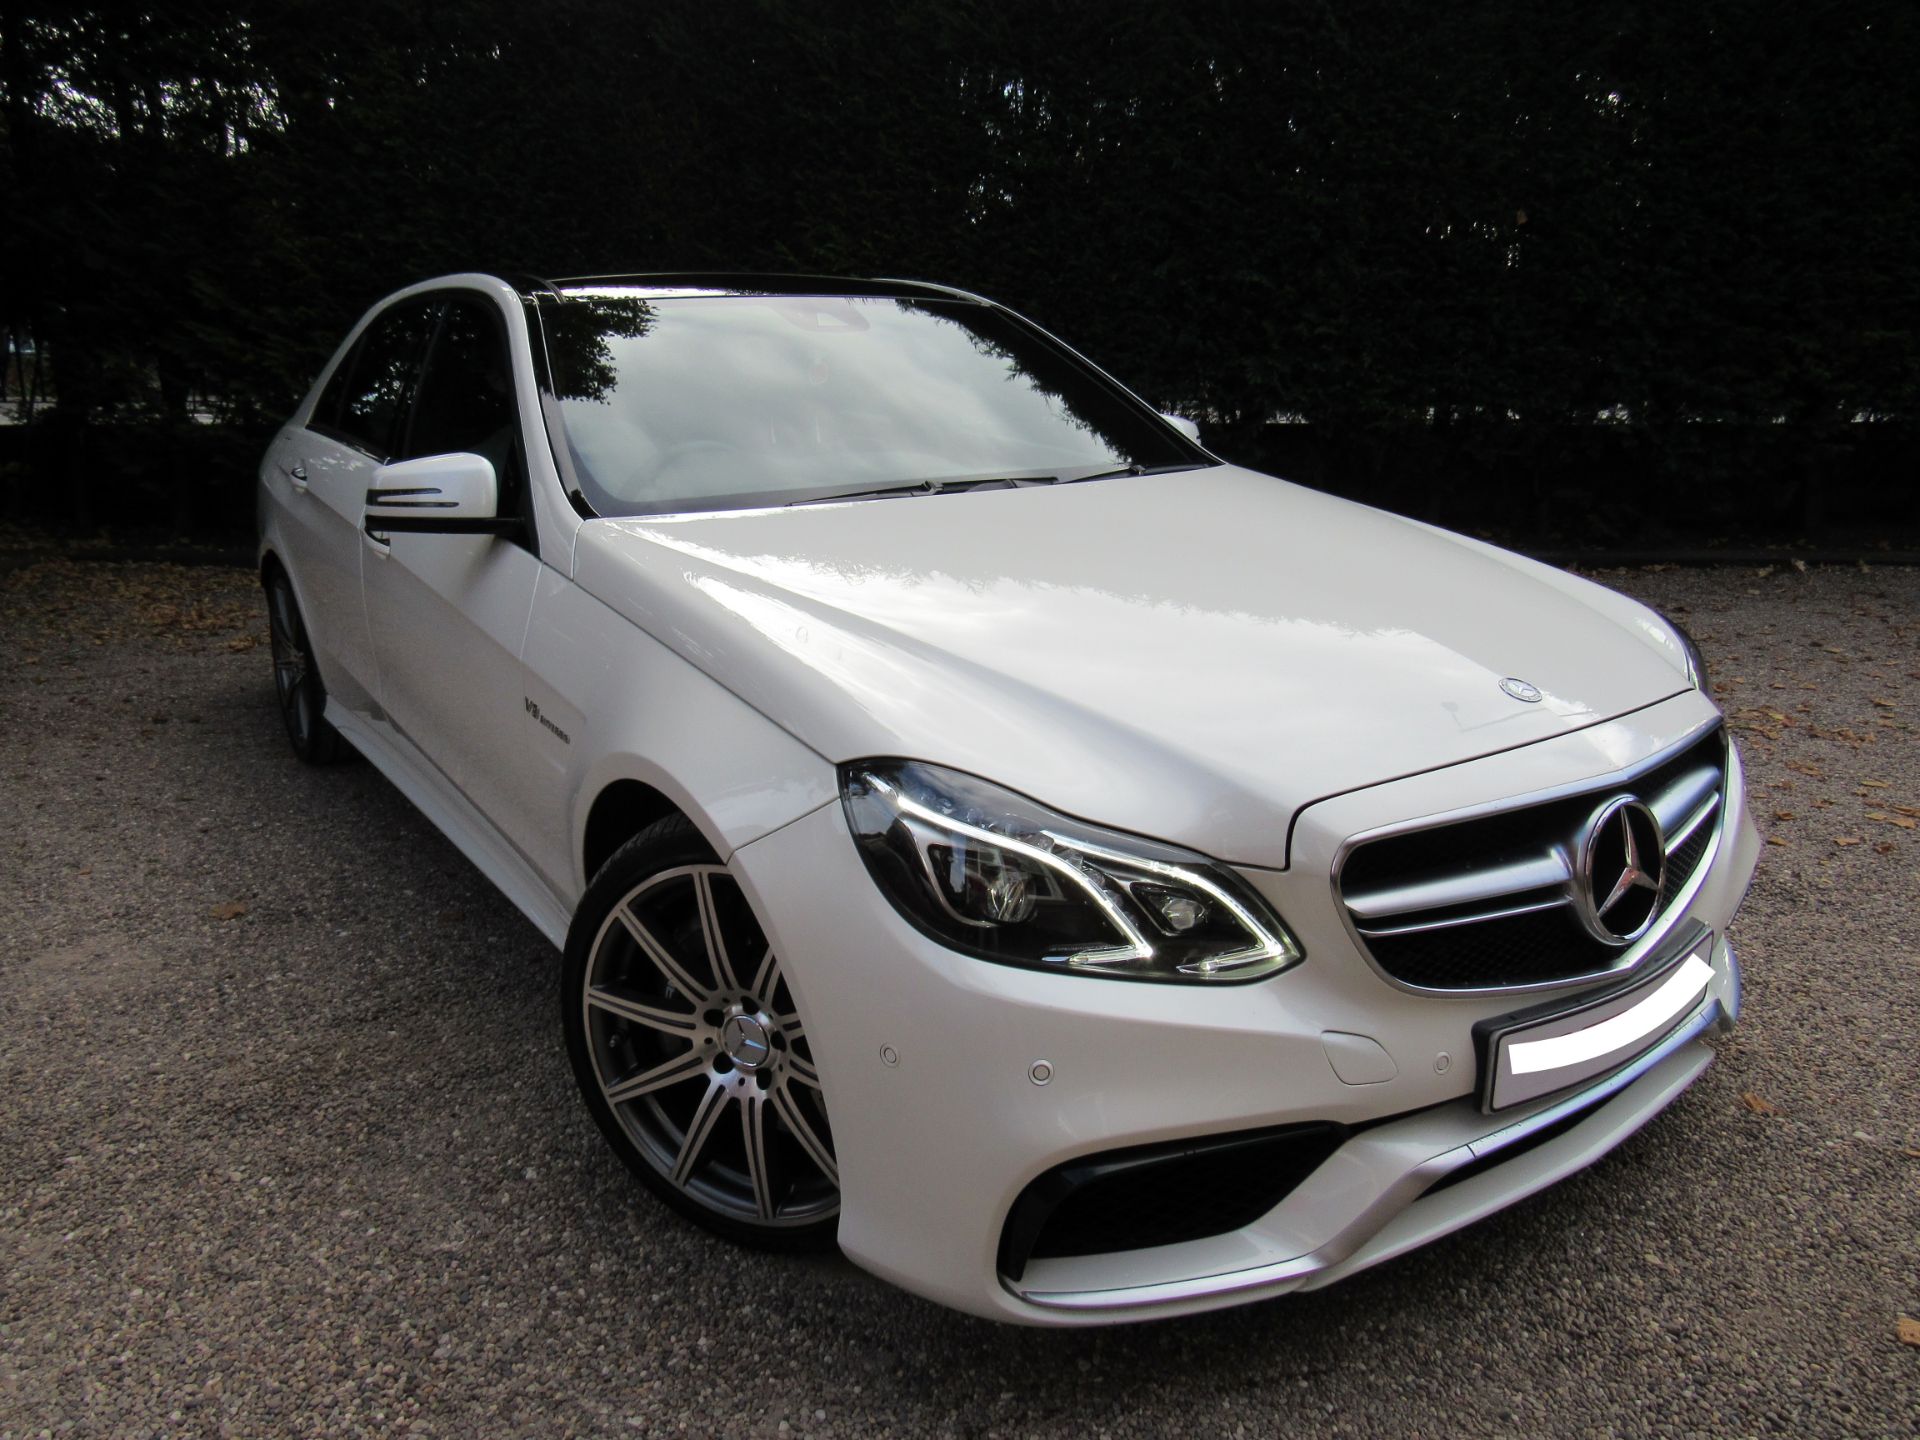 Mercedes-Benz E63 AMG Saloon - Registered 2013 - 33000 miles - This care has full panoramic sunroof, - Image 5 of 15